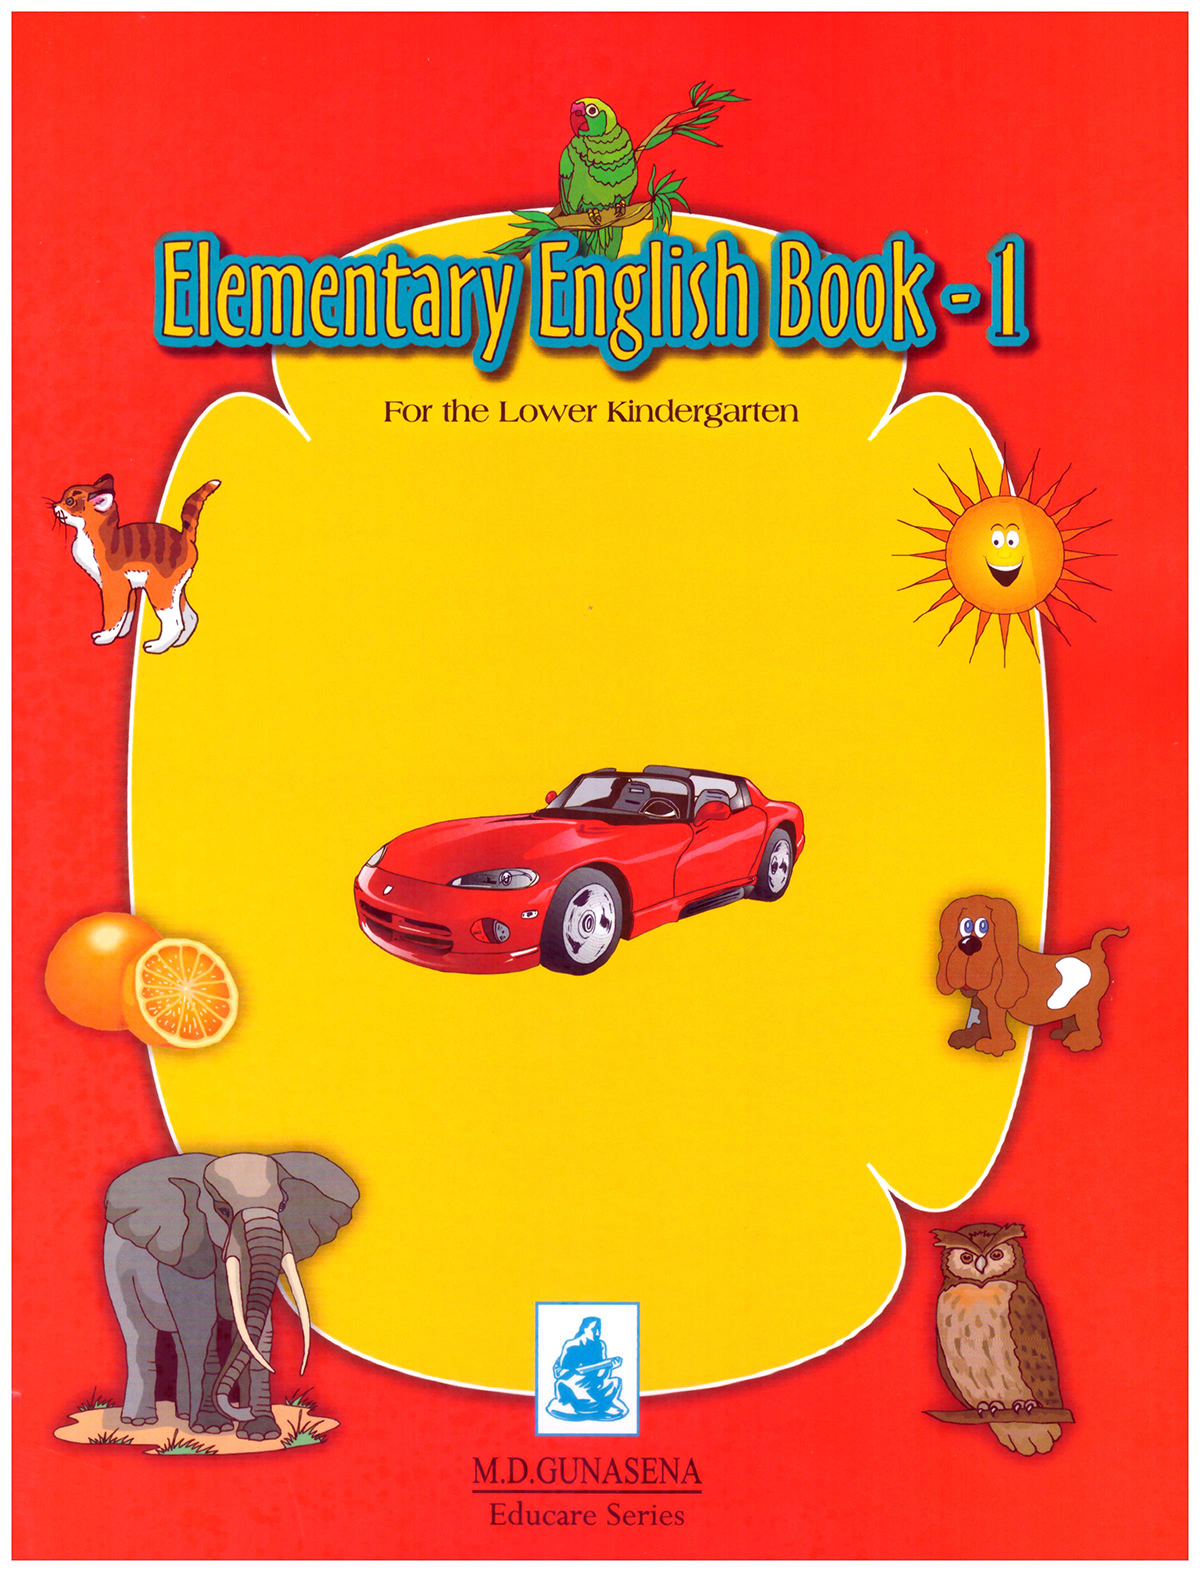 Elementary English Book - 1 For the Lower Kindergarten